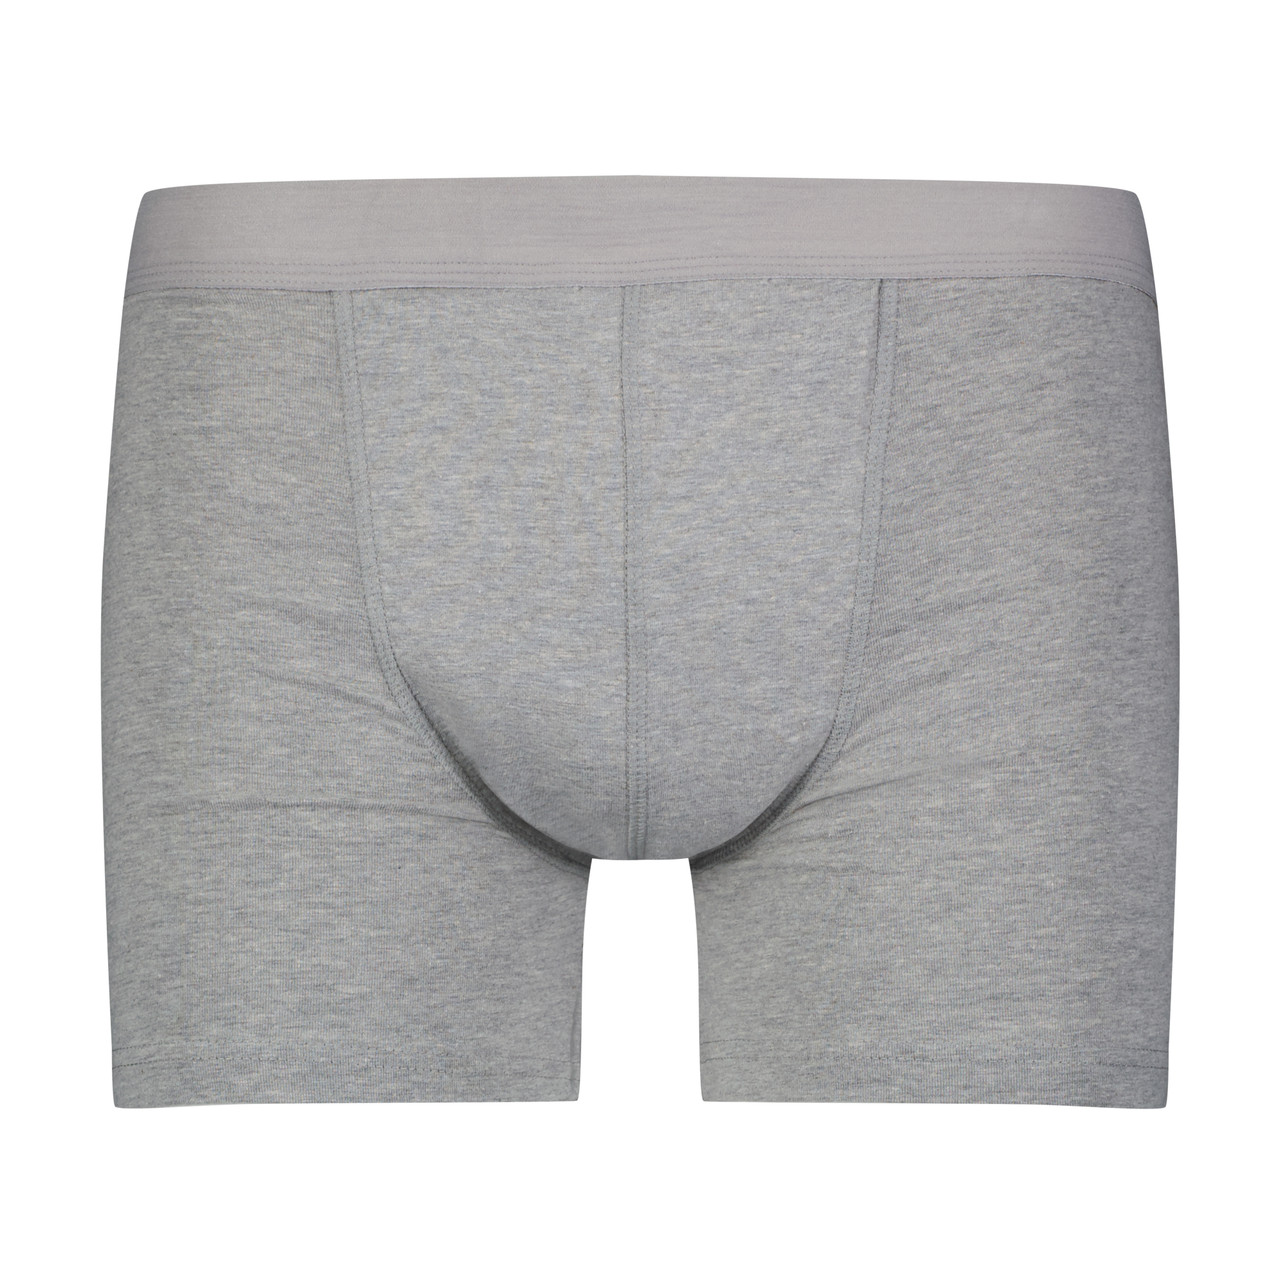 Full Coverage Regular Absorbency Trunk Boxer Brief (SKU: MBB300) - Wearever  Incontinence